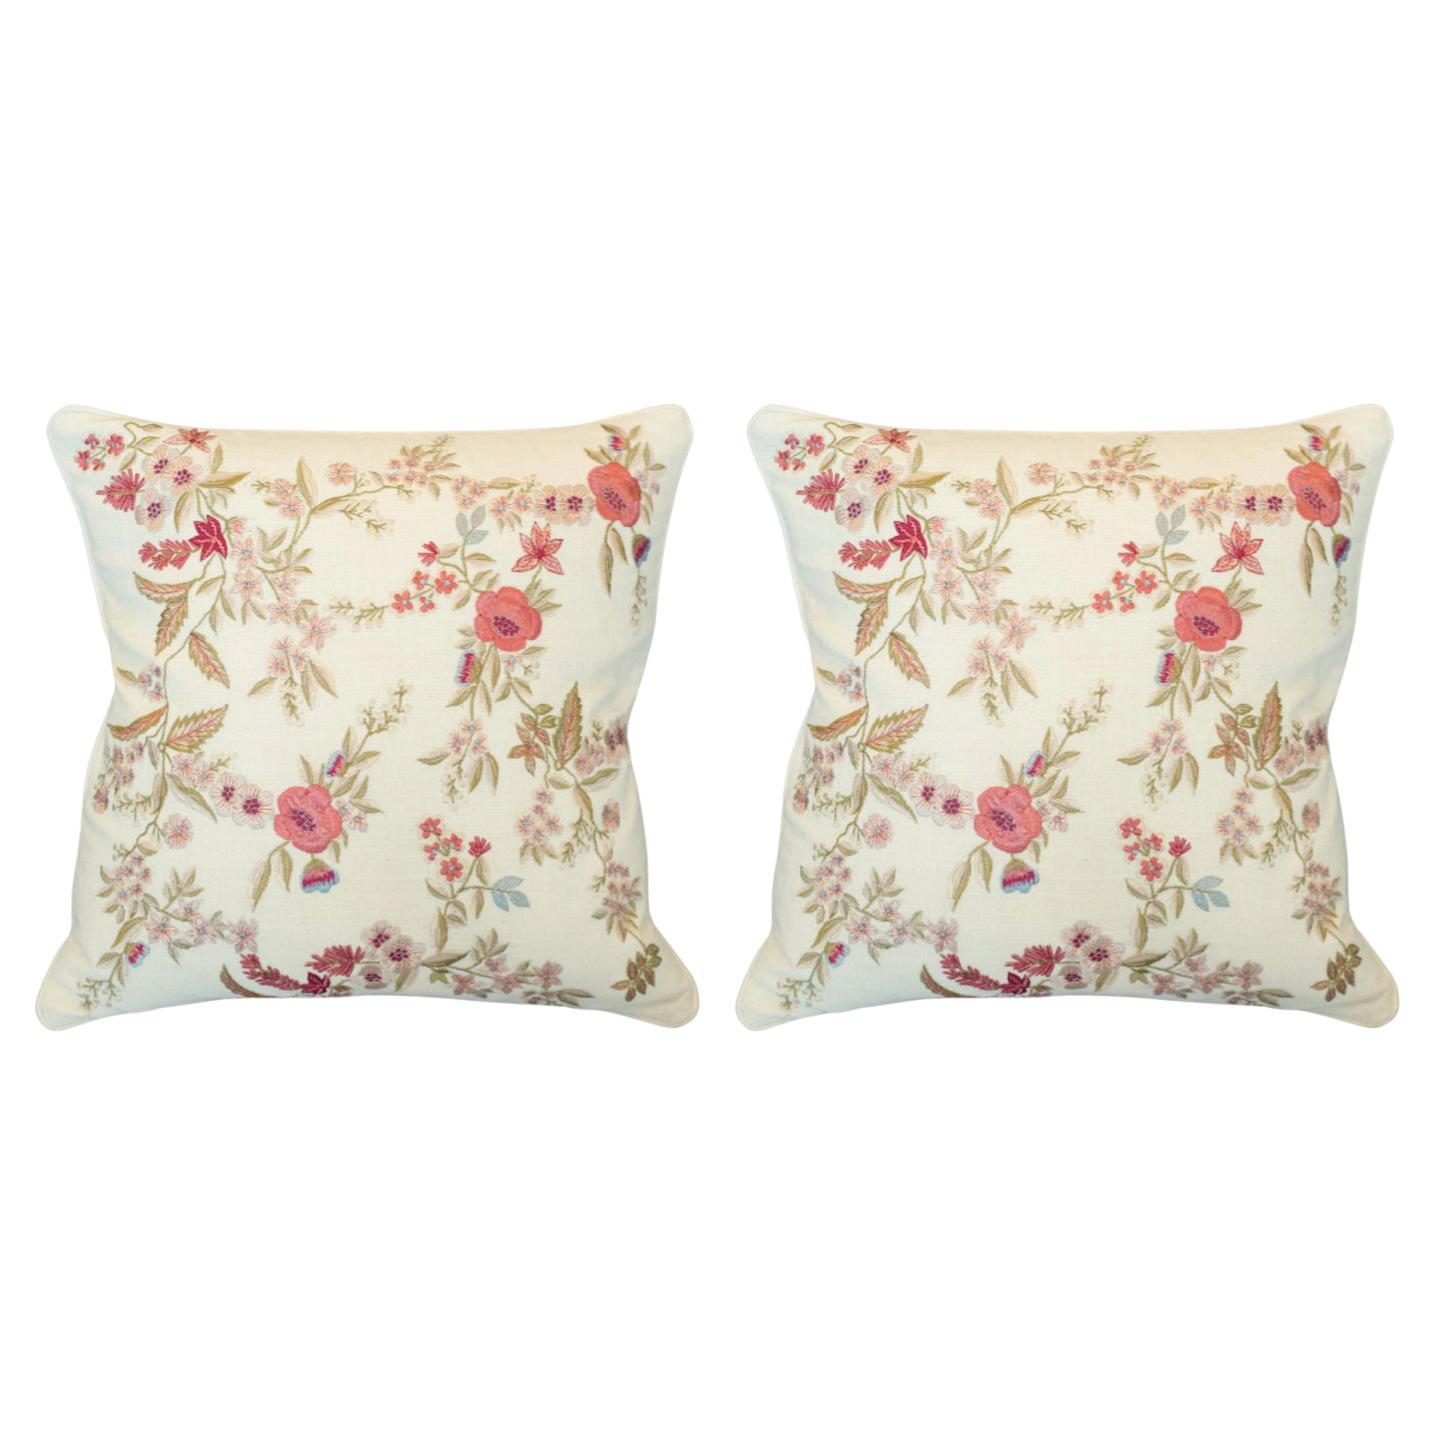 Contemporary Pair of Cotton Pillows with Ornate Floral Embroidery